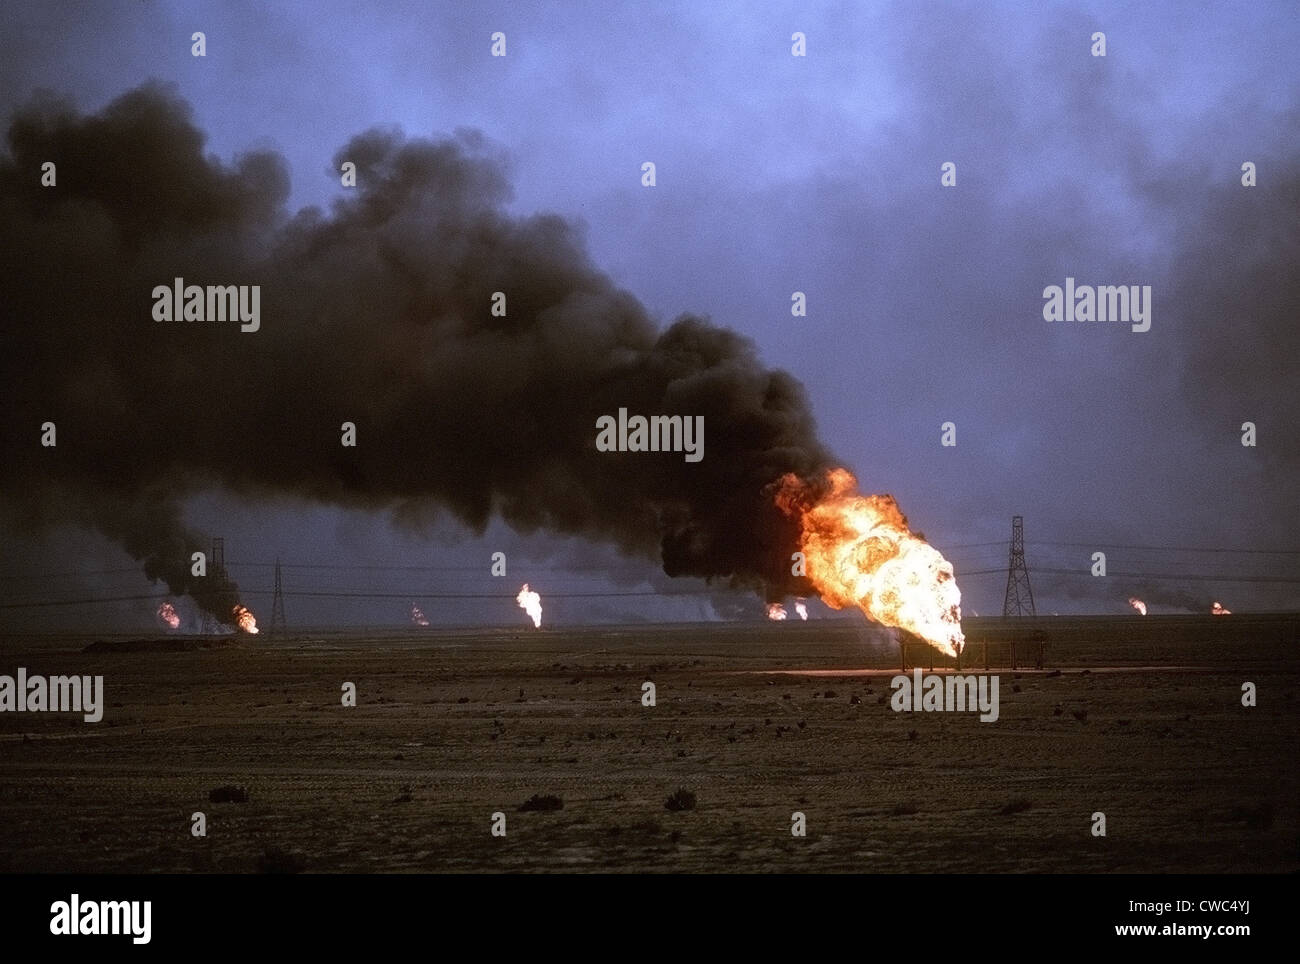 Kuwaiti oil wells set on fire by retreating Iraqi forces during Operation Desert Storm darken the sky with smoke. Mar. 1 1991 Stock Photo